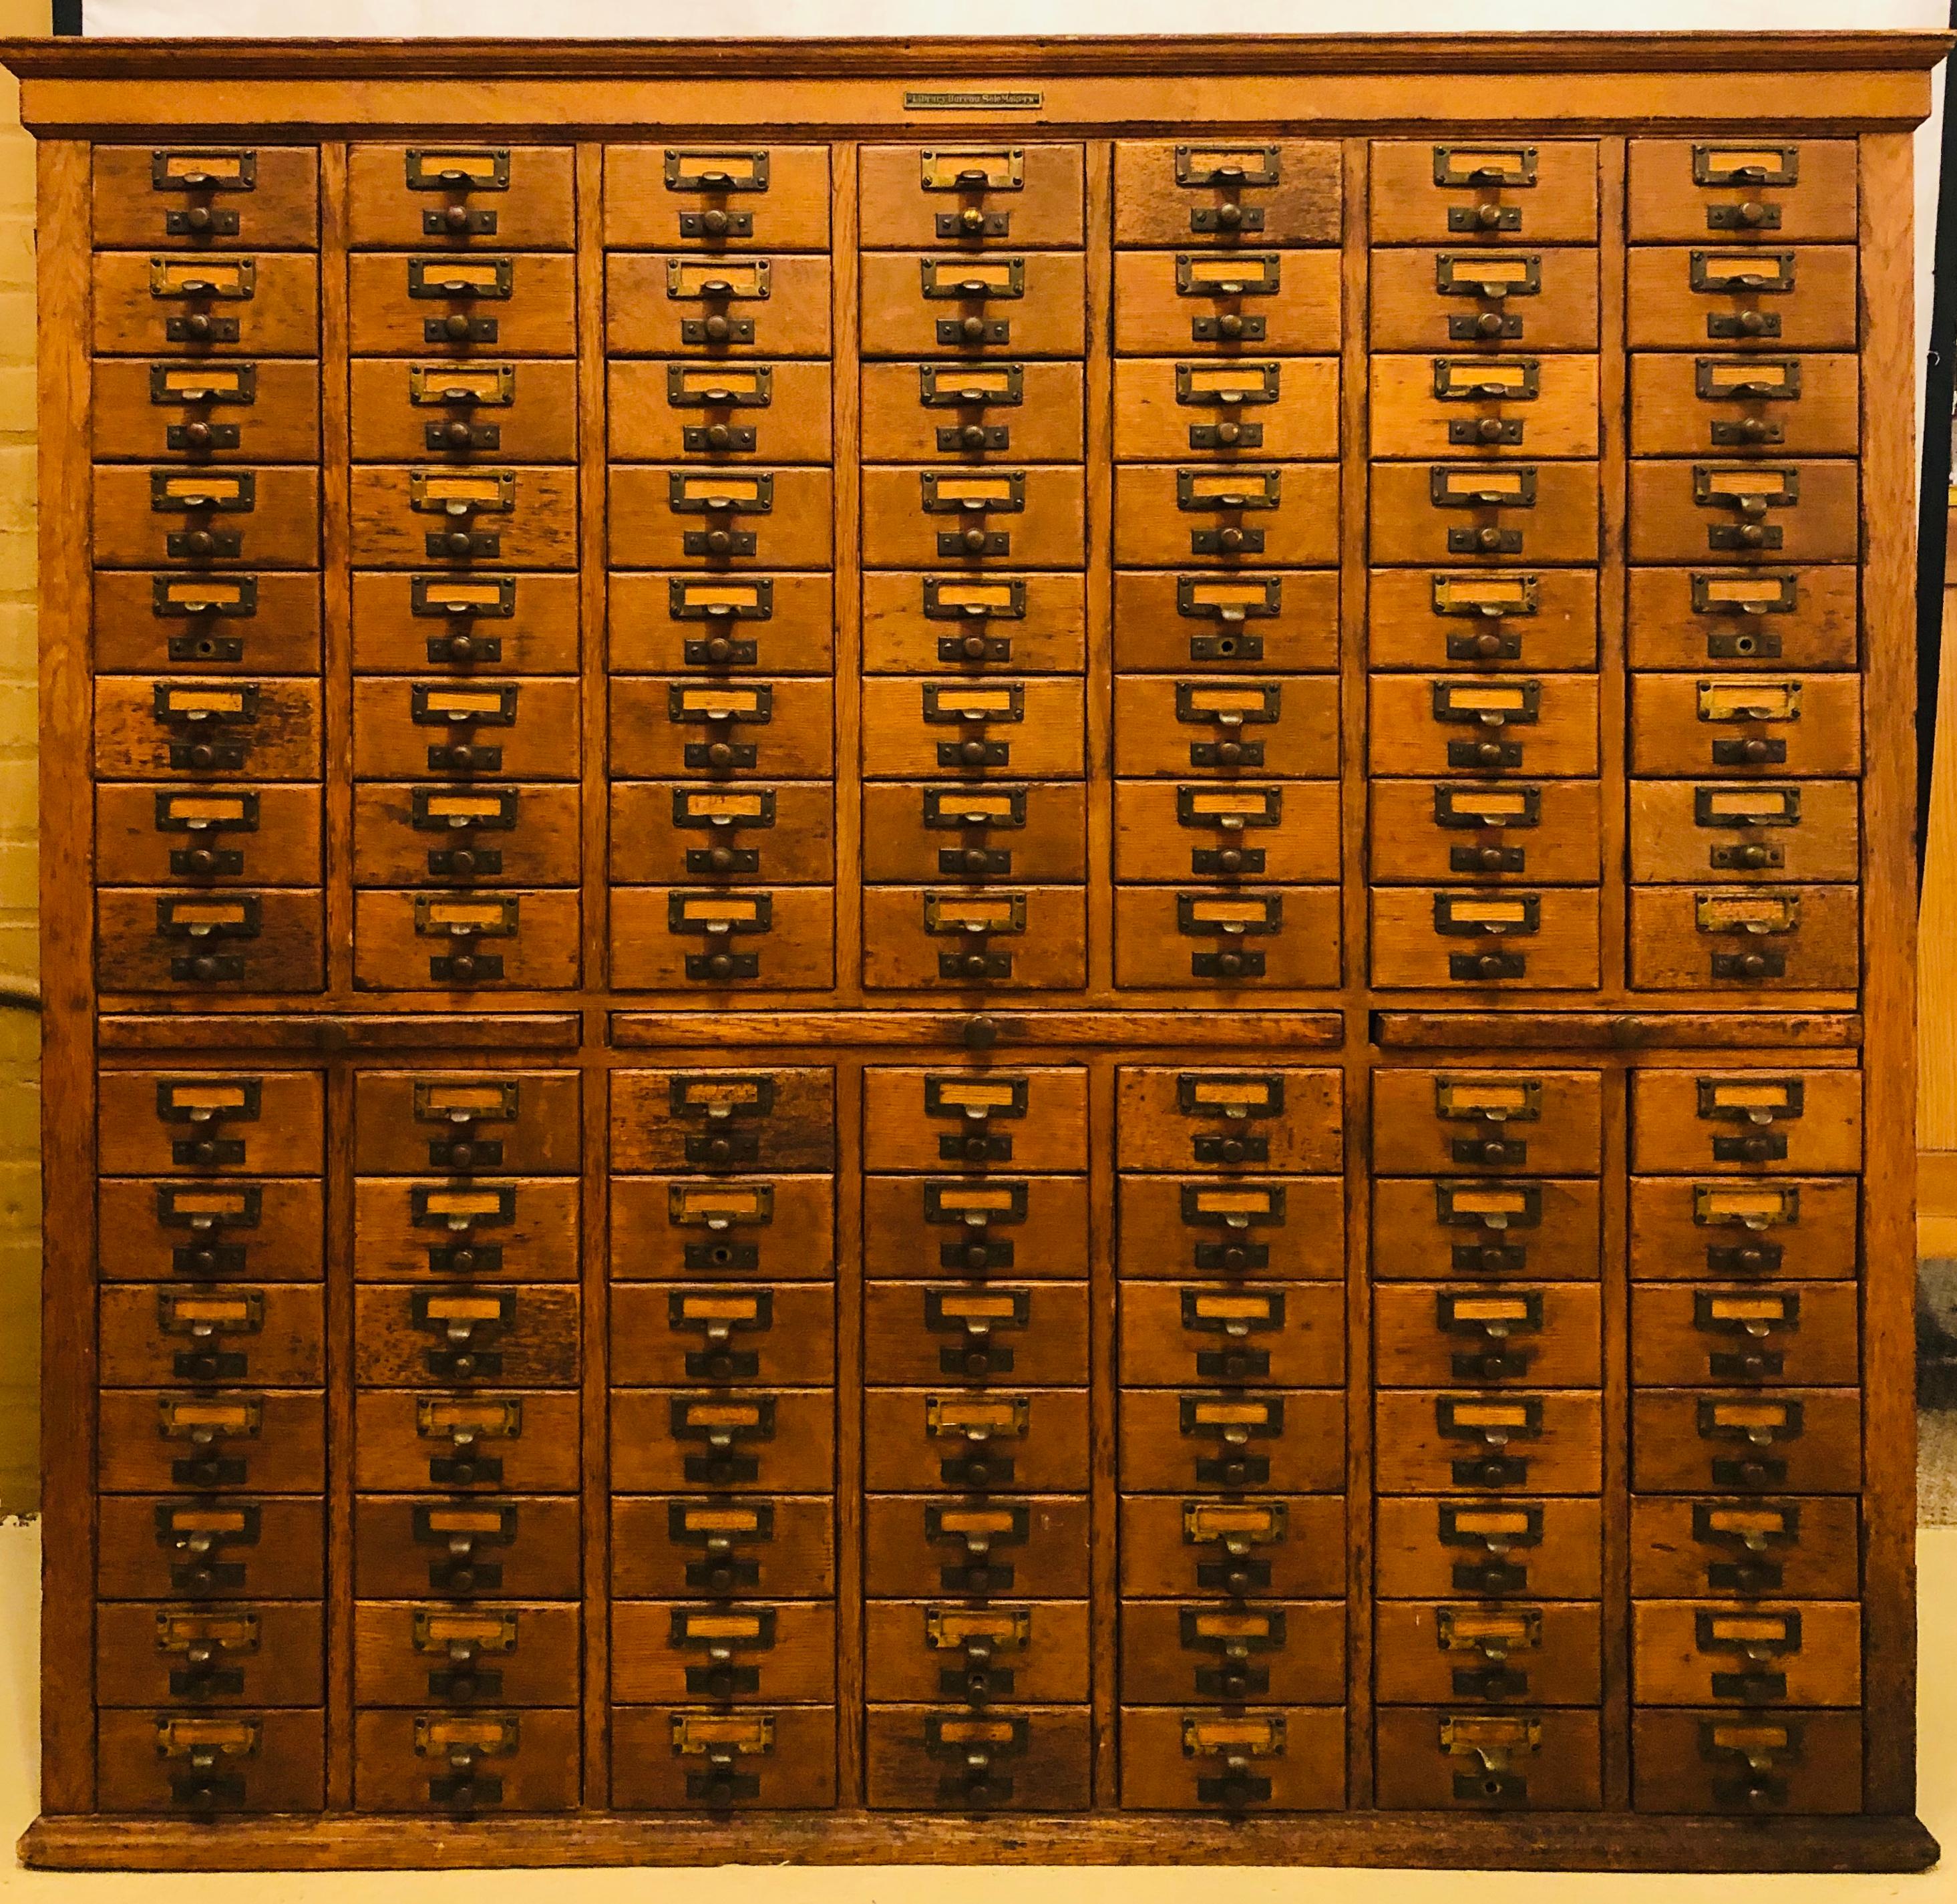 Oak 1920s library bureau sole maker card catalog cabinet. This is a large and impressive 105 drawer double cabinet on cabinet. This piece is an antique library bureau sole makers (SoleMakers) 60-drawer library card catalog (also known as filing